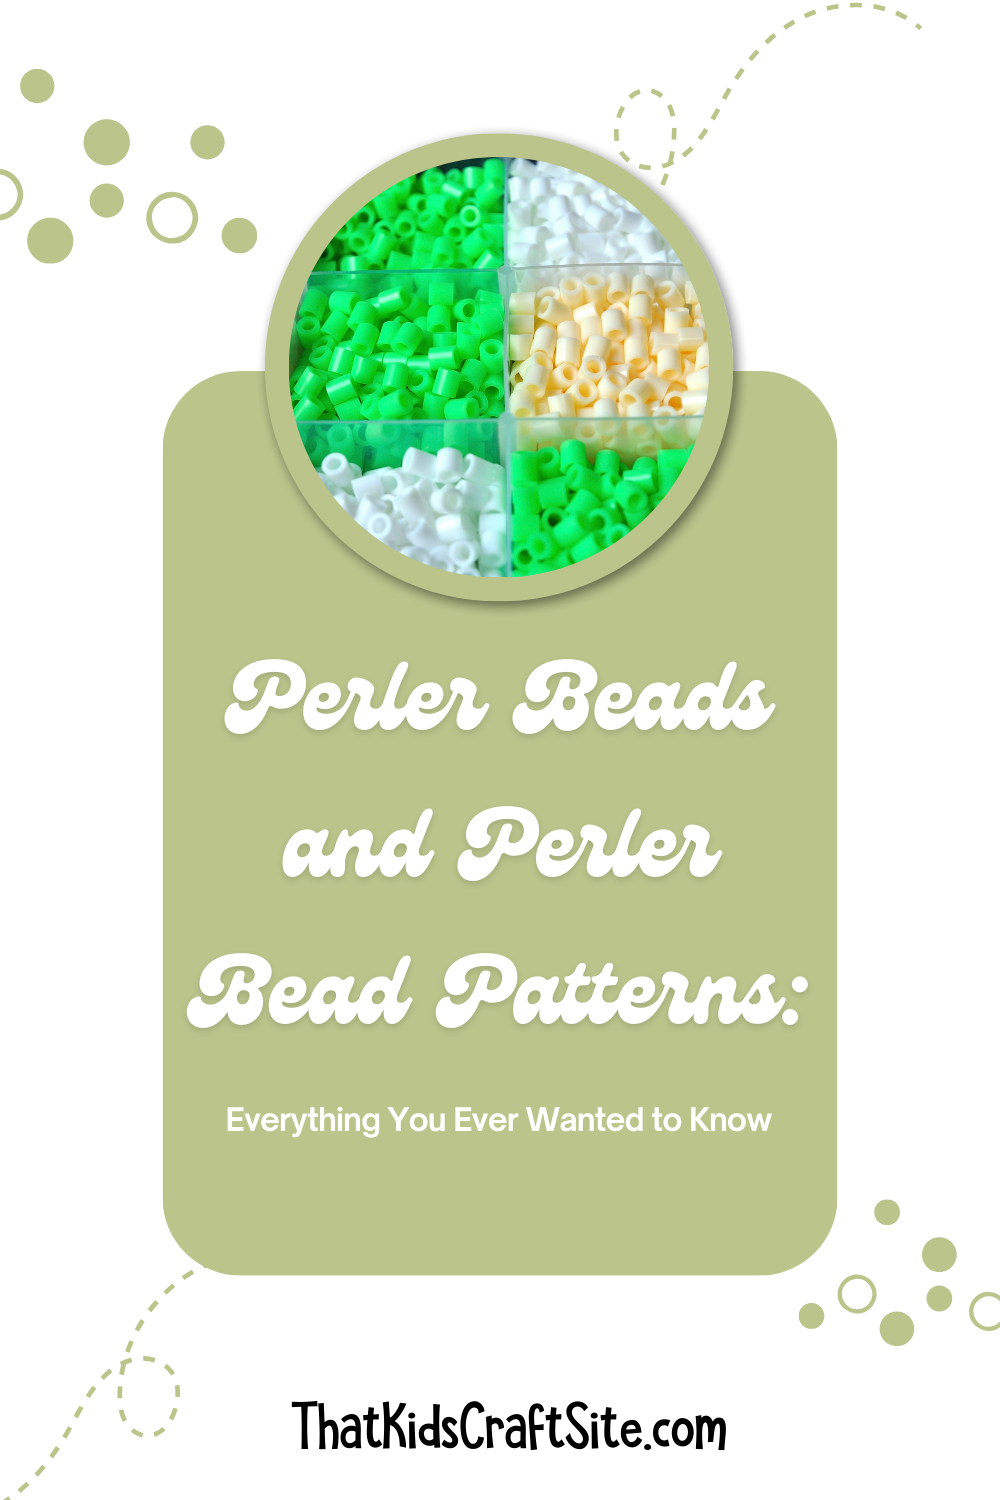 Perler Beads and Perler Bead Patterns: Everything You Ever Wanted to Know